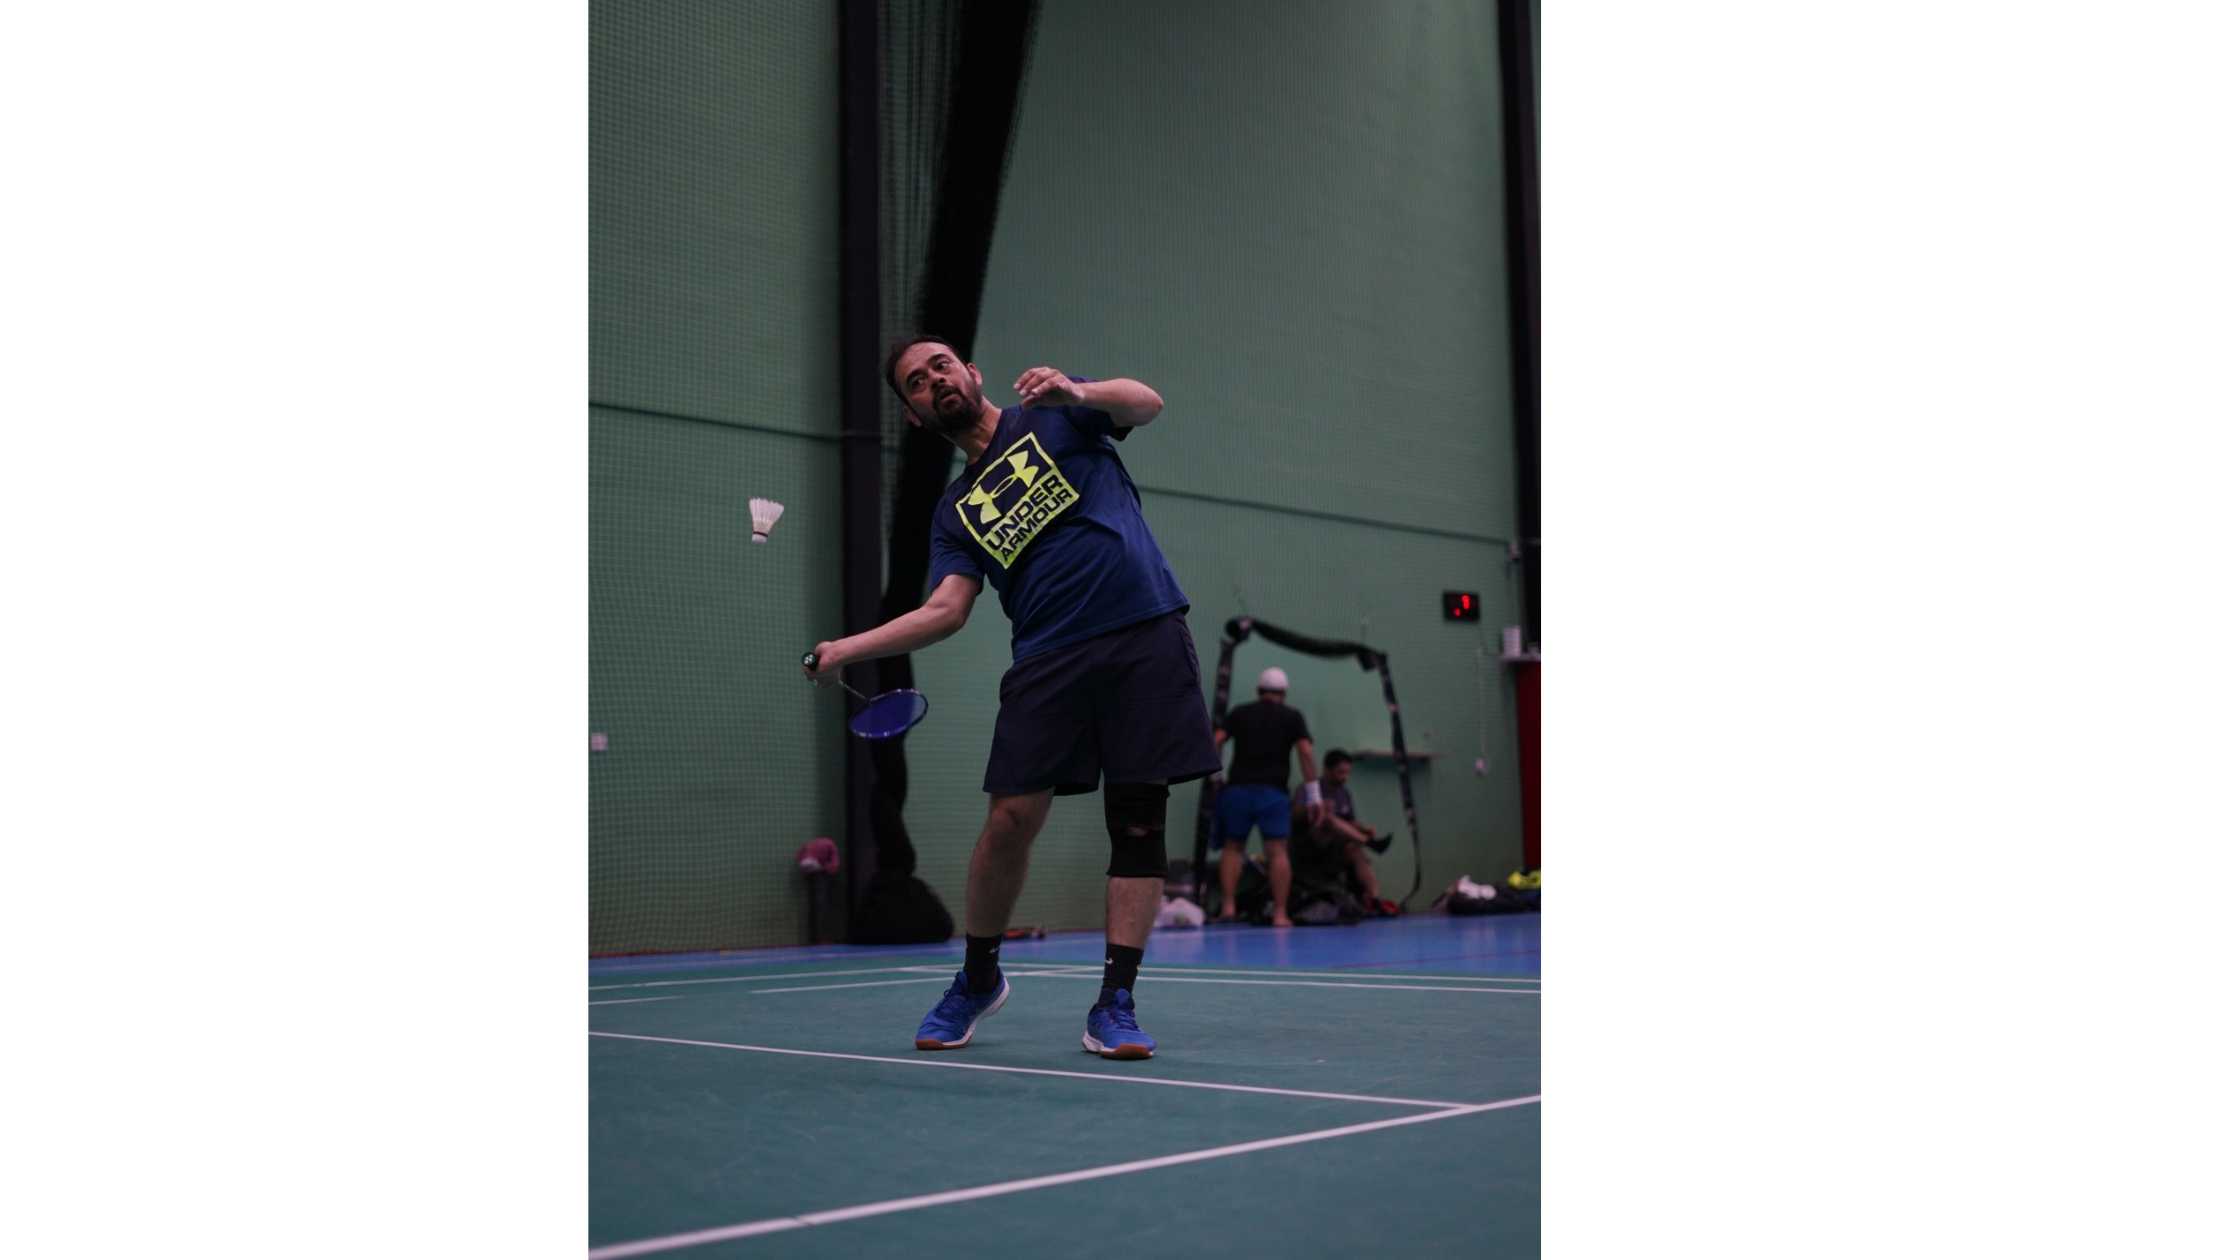 Why Badminton is Growing Popular in Dubai and How Coaches are Adapting: Explore how the interest in badminton is growing within Dubai's sports scene and how this impacts the coaching industry there.